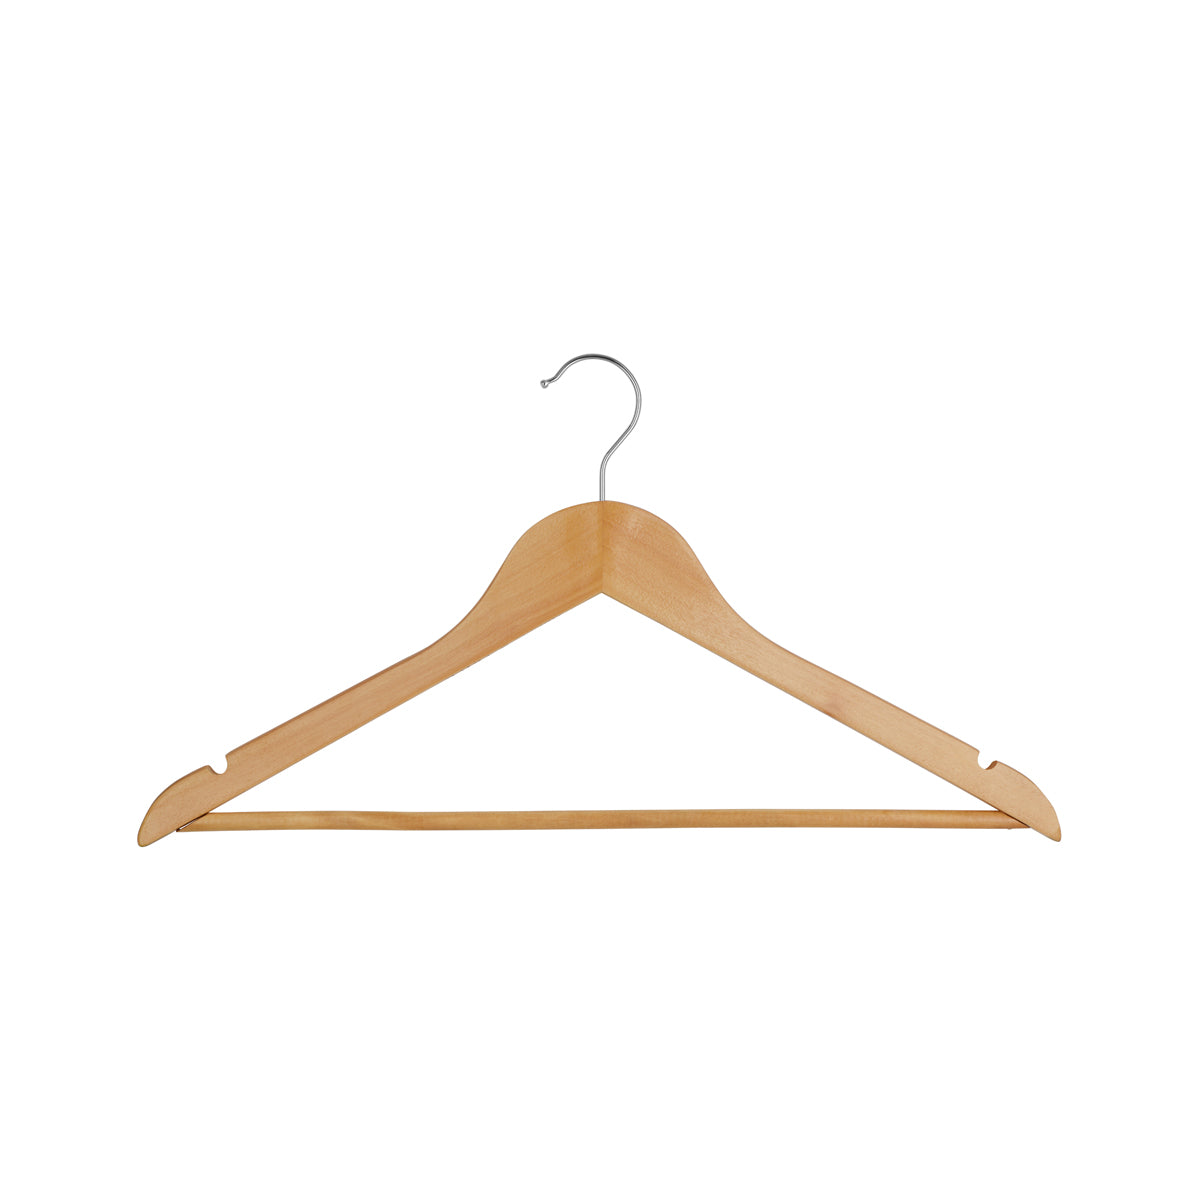 9000-24 Noble & Price Hanger Standard with Hook Birch 445x230x12mm Tomkin Australia Hospitality Supplies